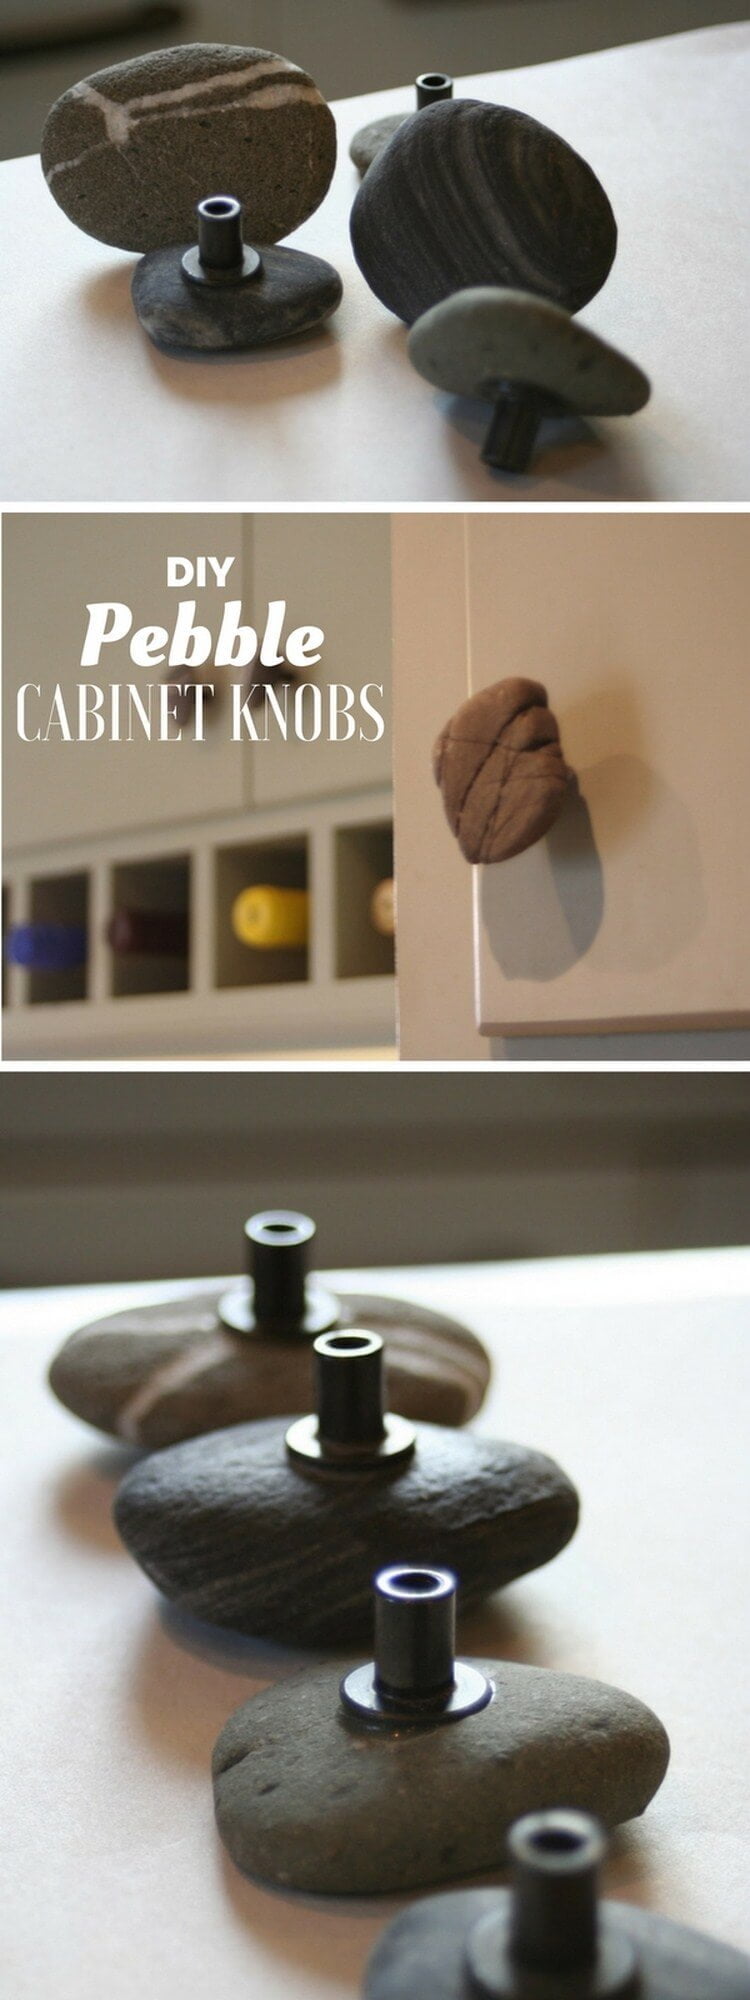 Switch Out Your Cabinet Knobs with Pretty Polished Stones